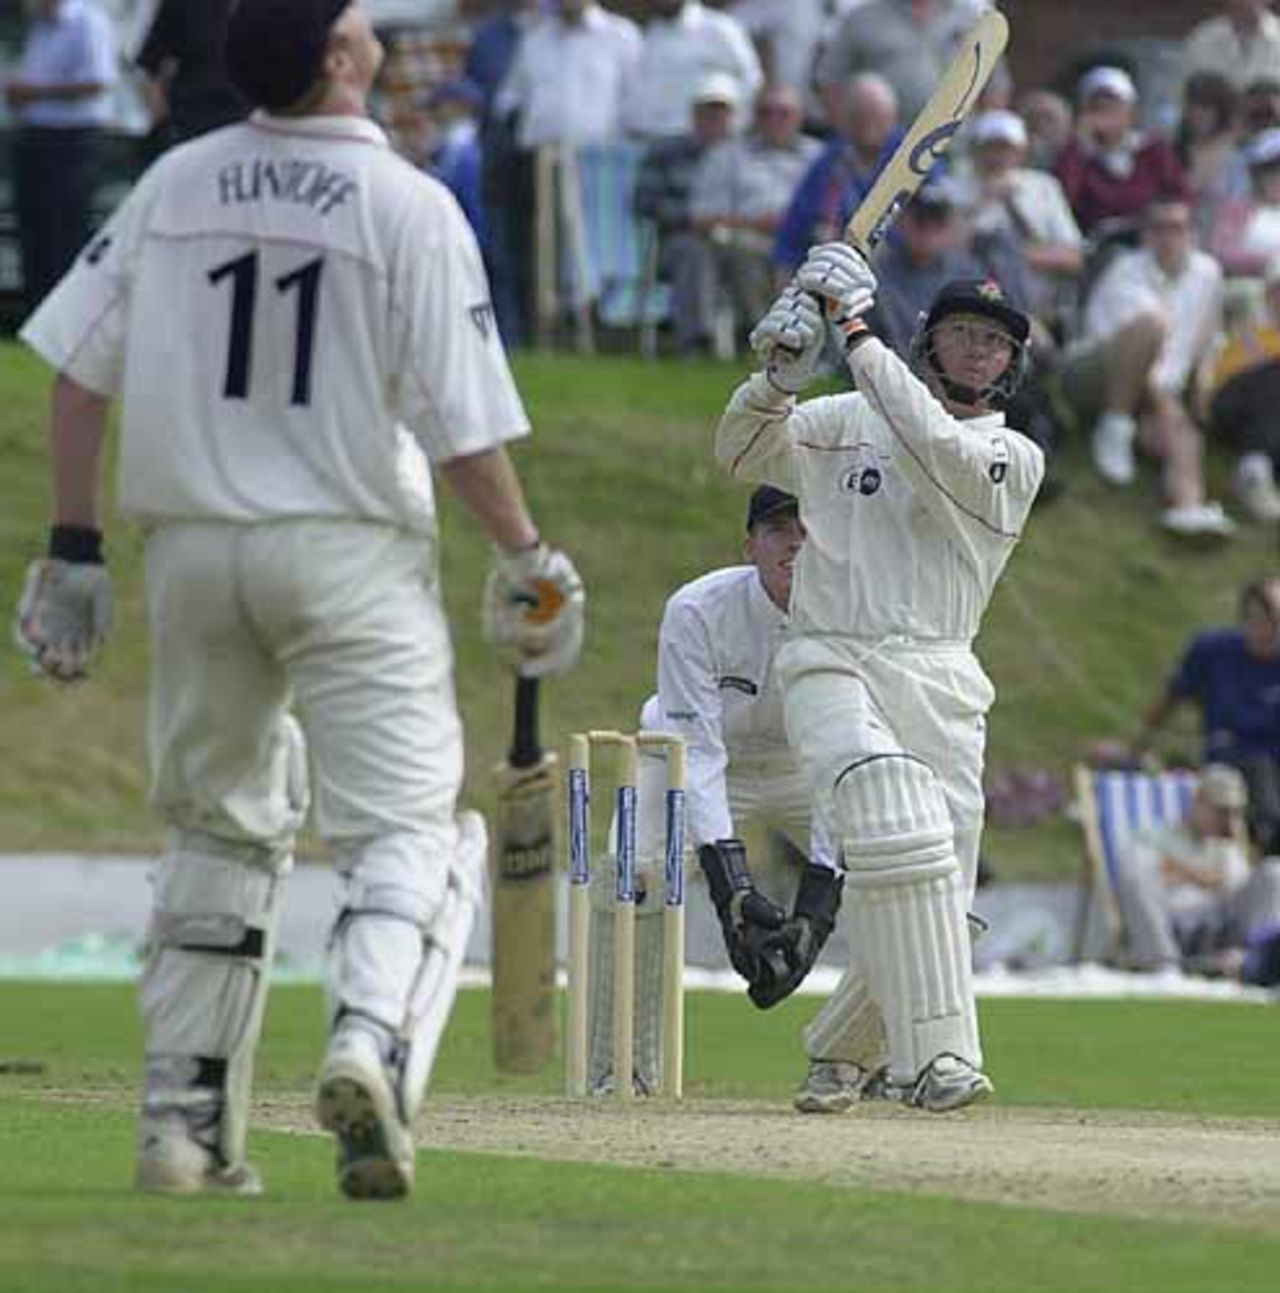 Fairbrother whacks a six over long on at the Blackpool Stanley Park ground, C+G Quarter Final, Blackpool, 25 Jul 2001